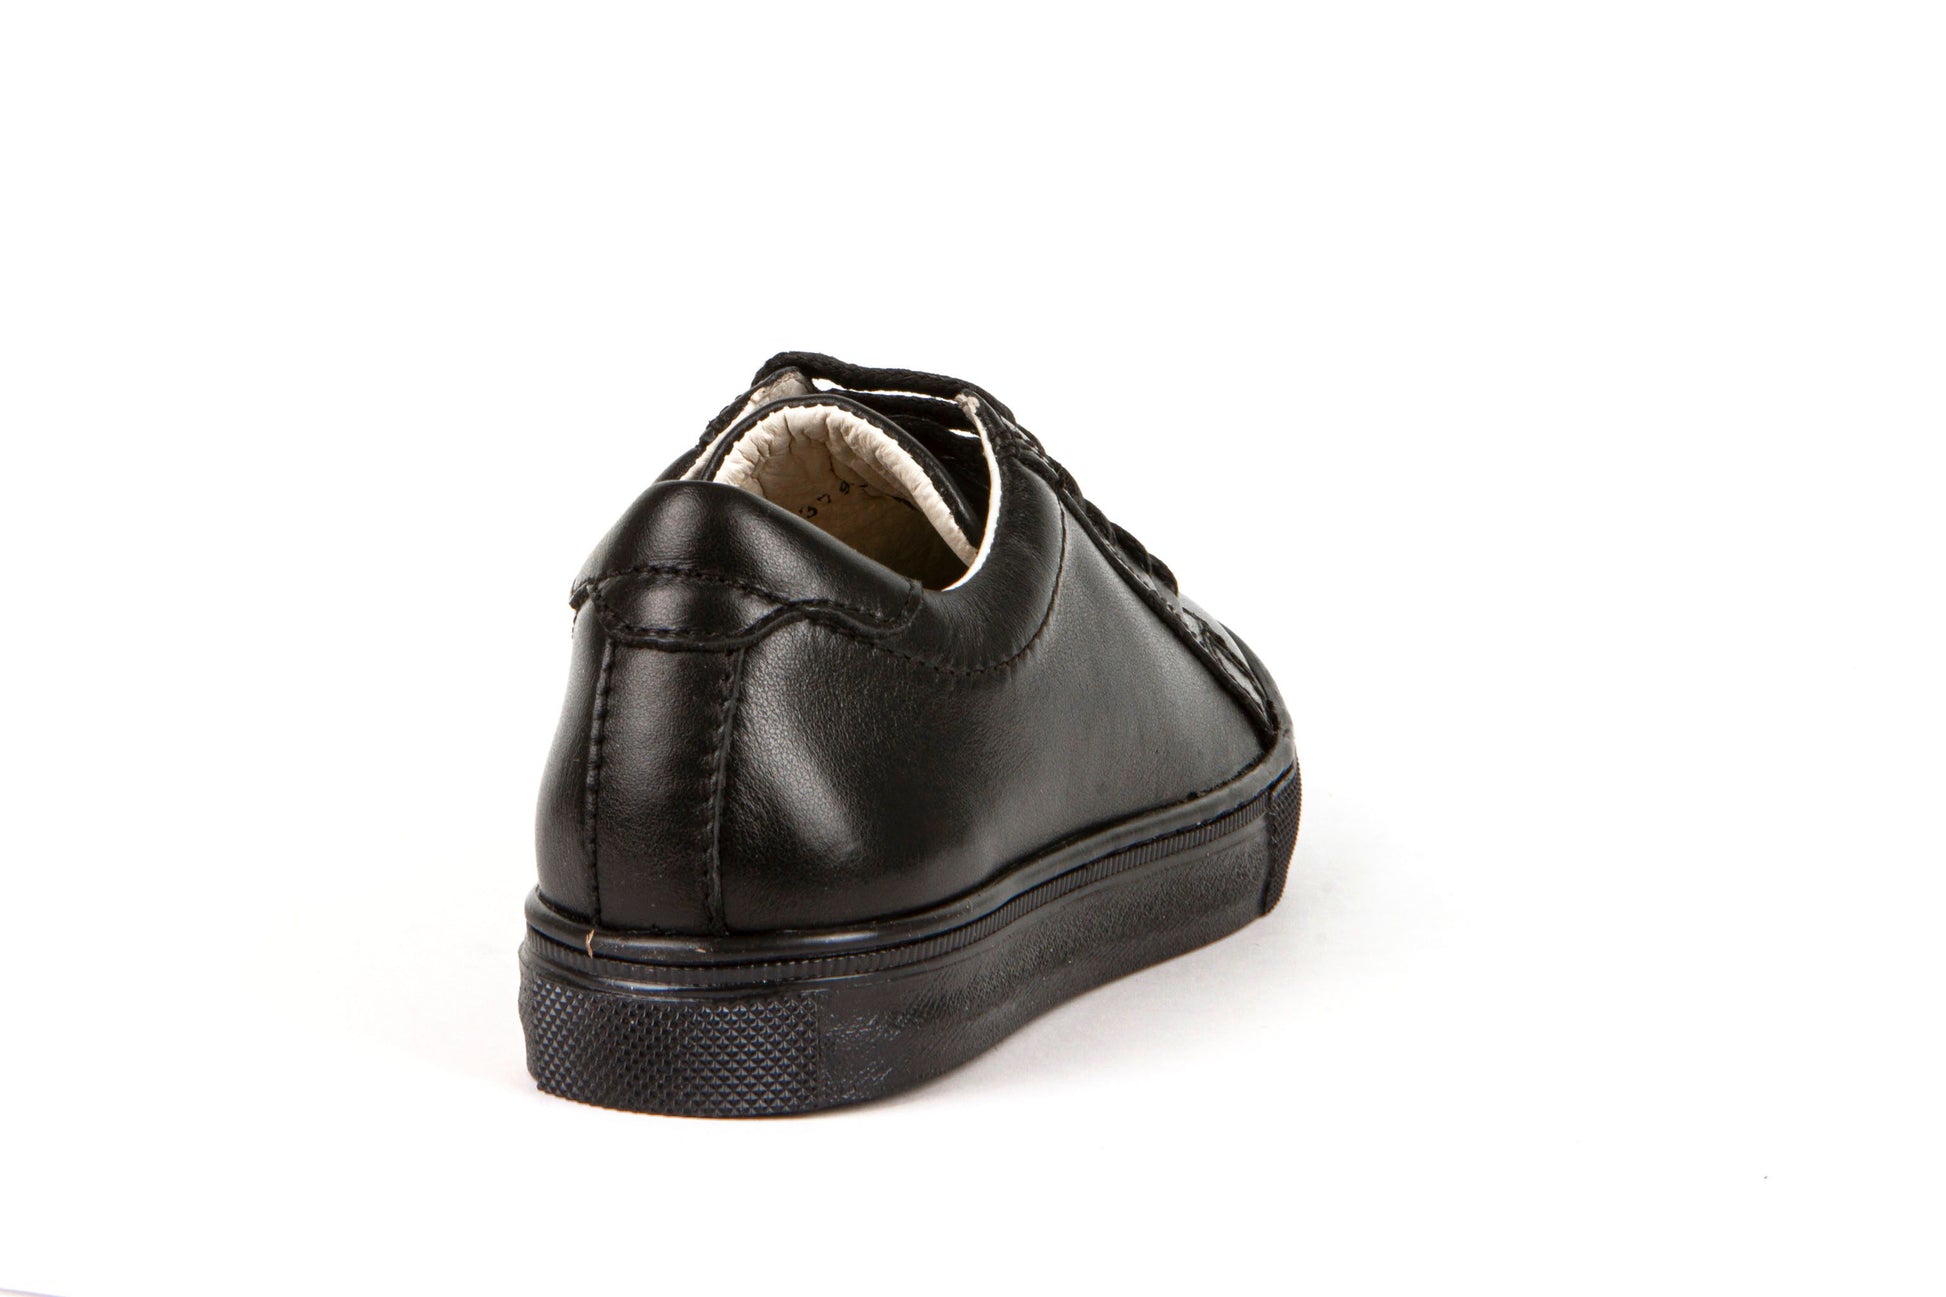 A boys school shoe by Froddo, style Morgan L, in black with lace up fastening. Back view.